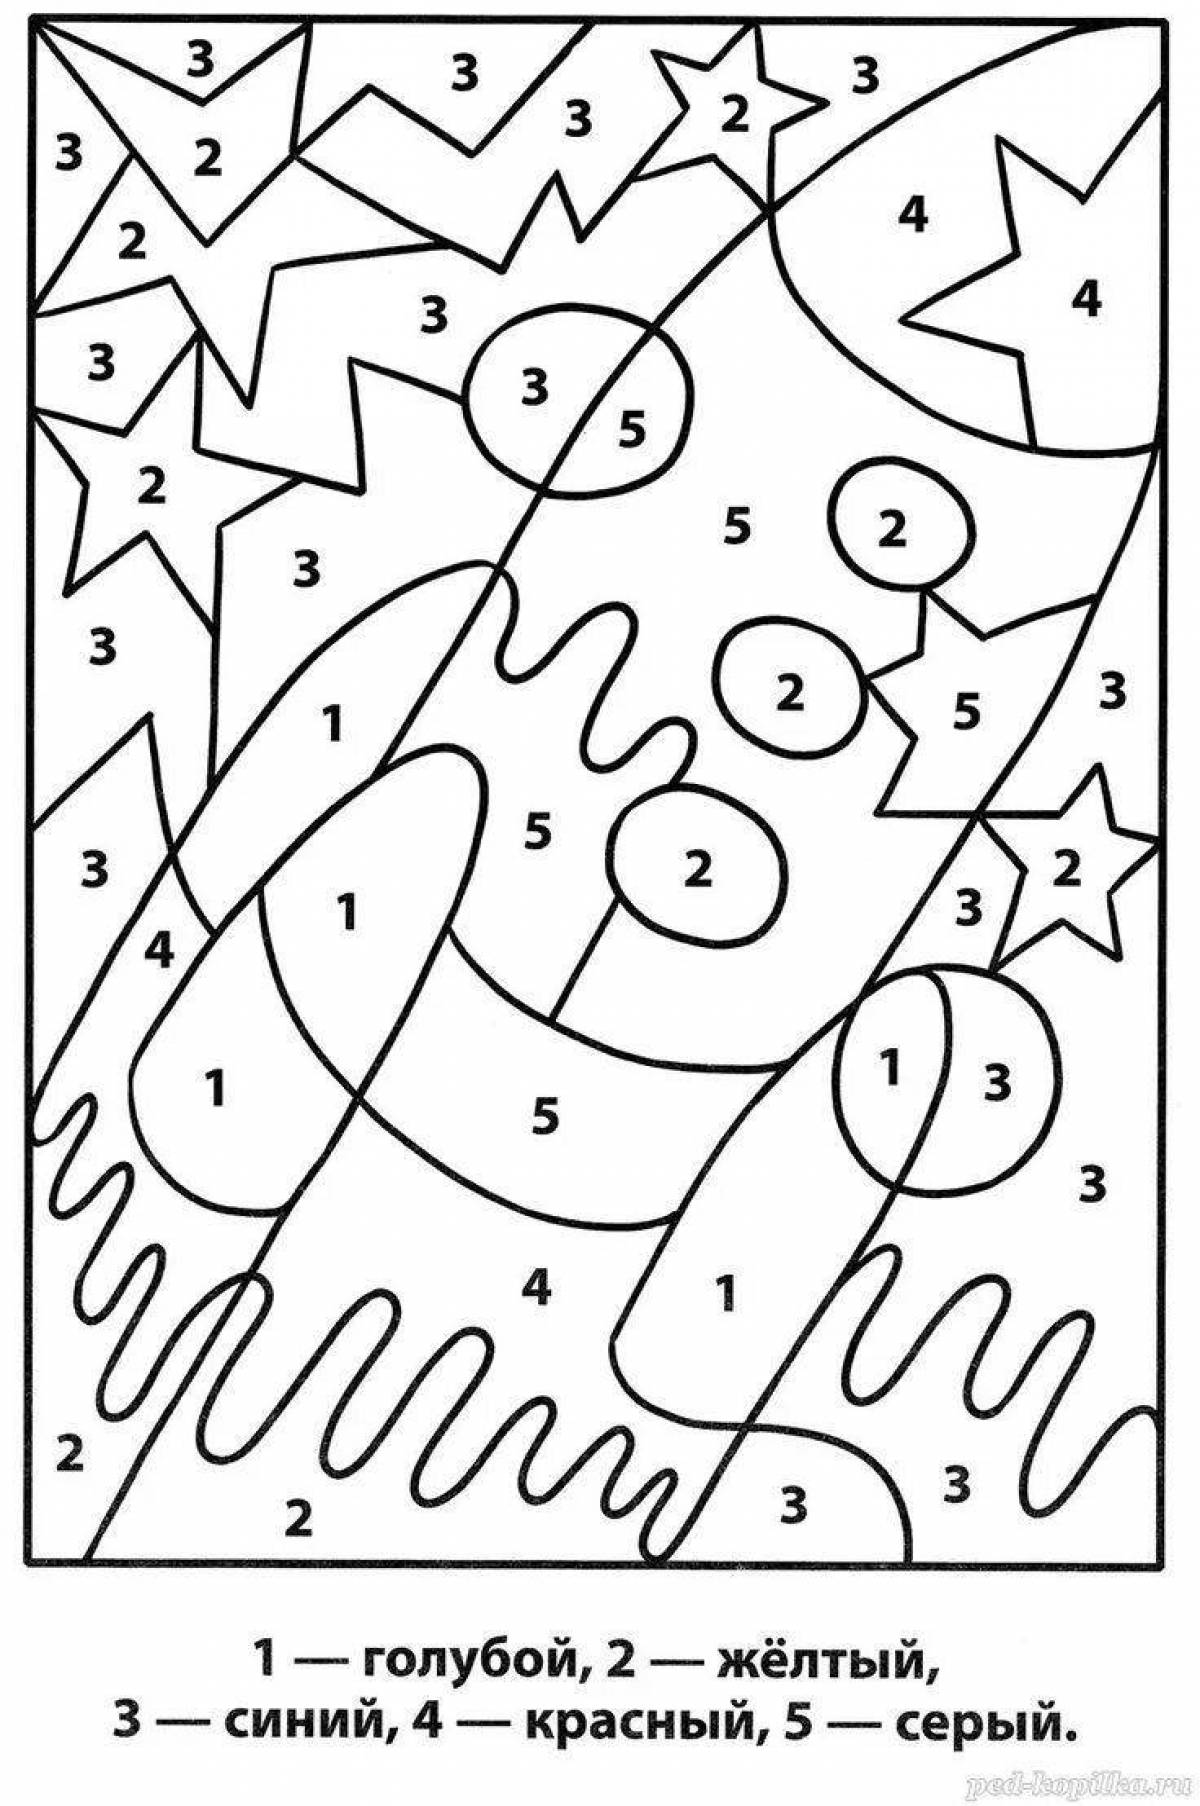 Intriguing coloring book 